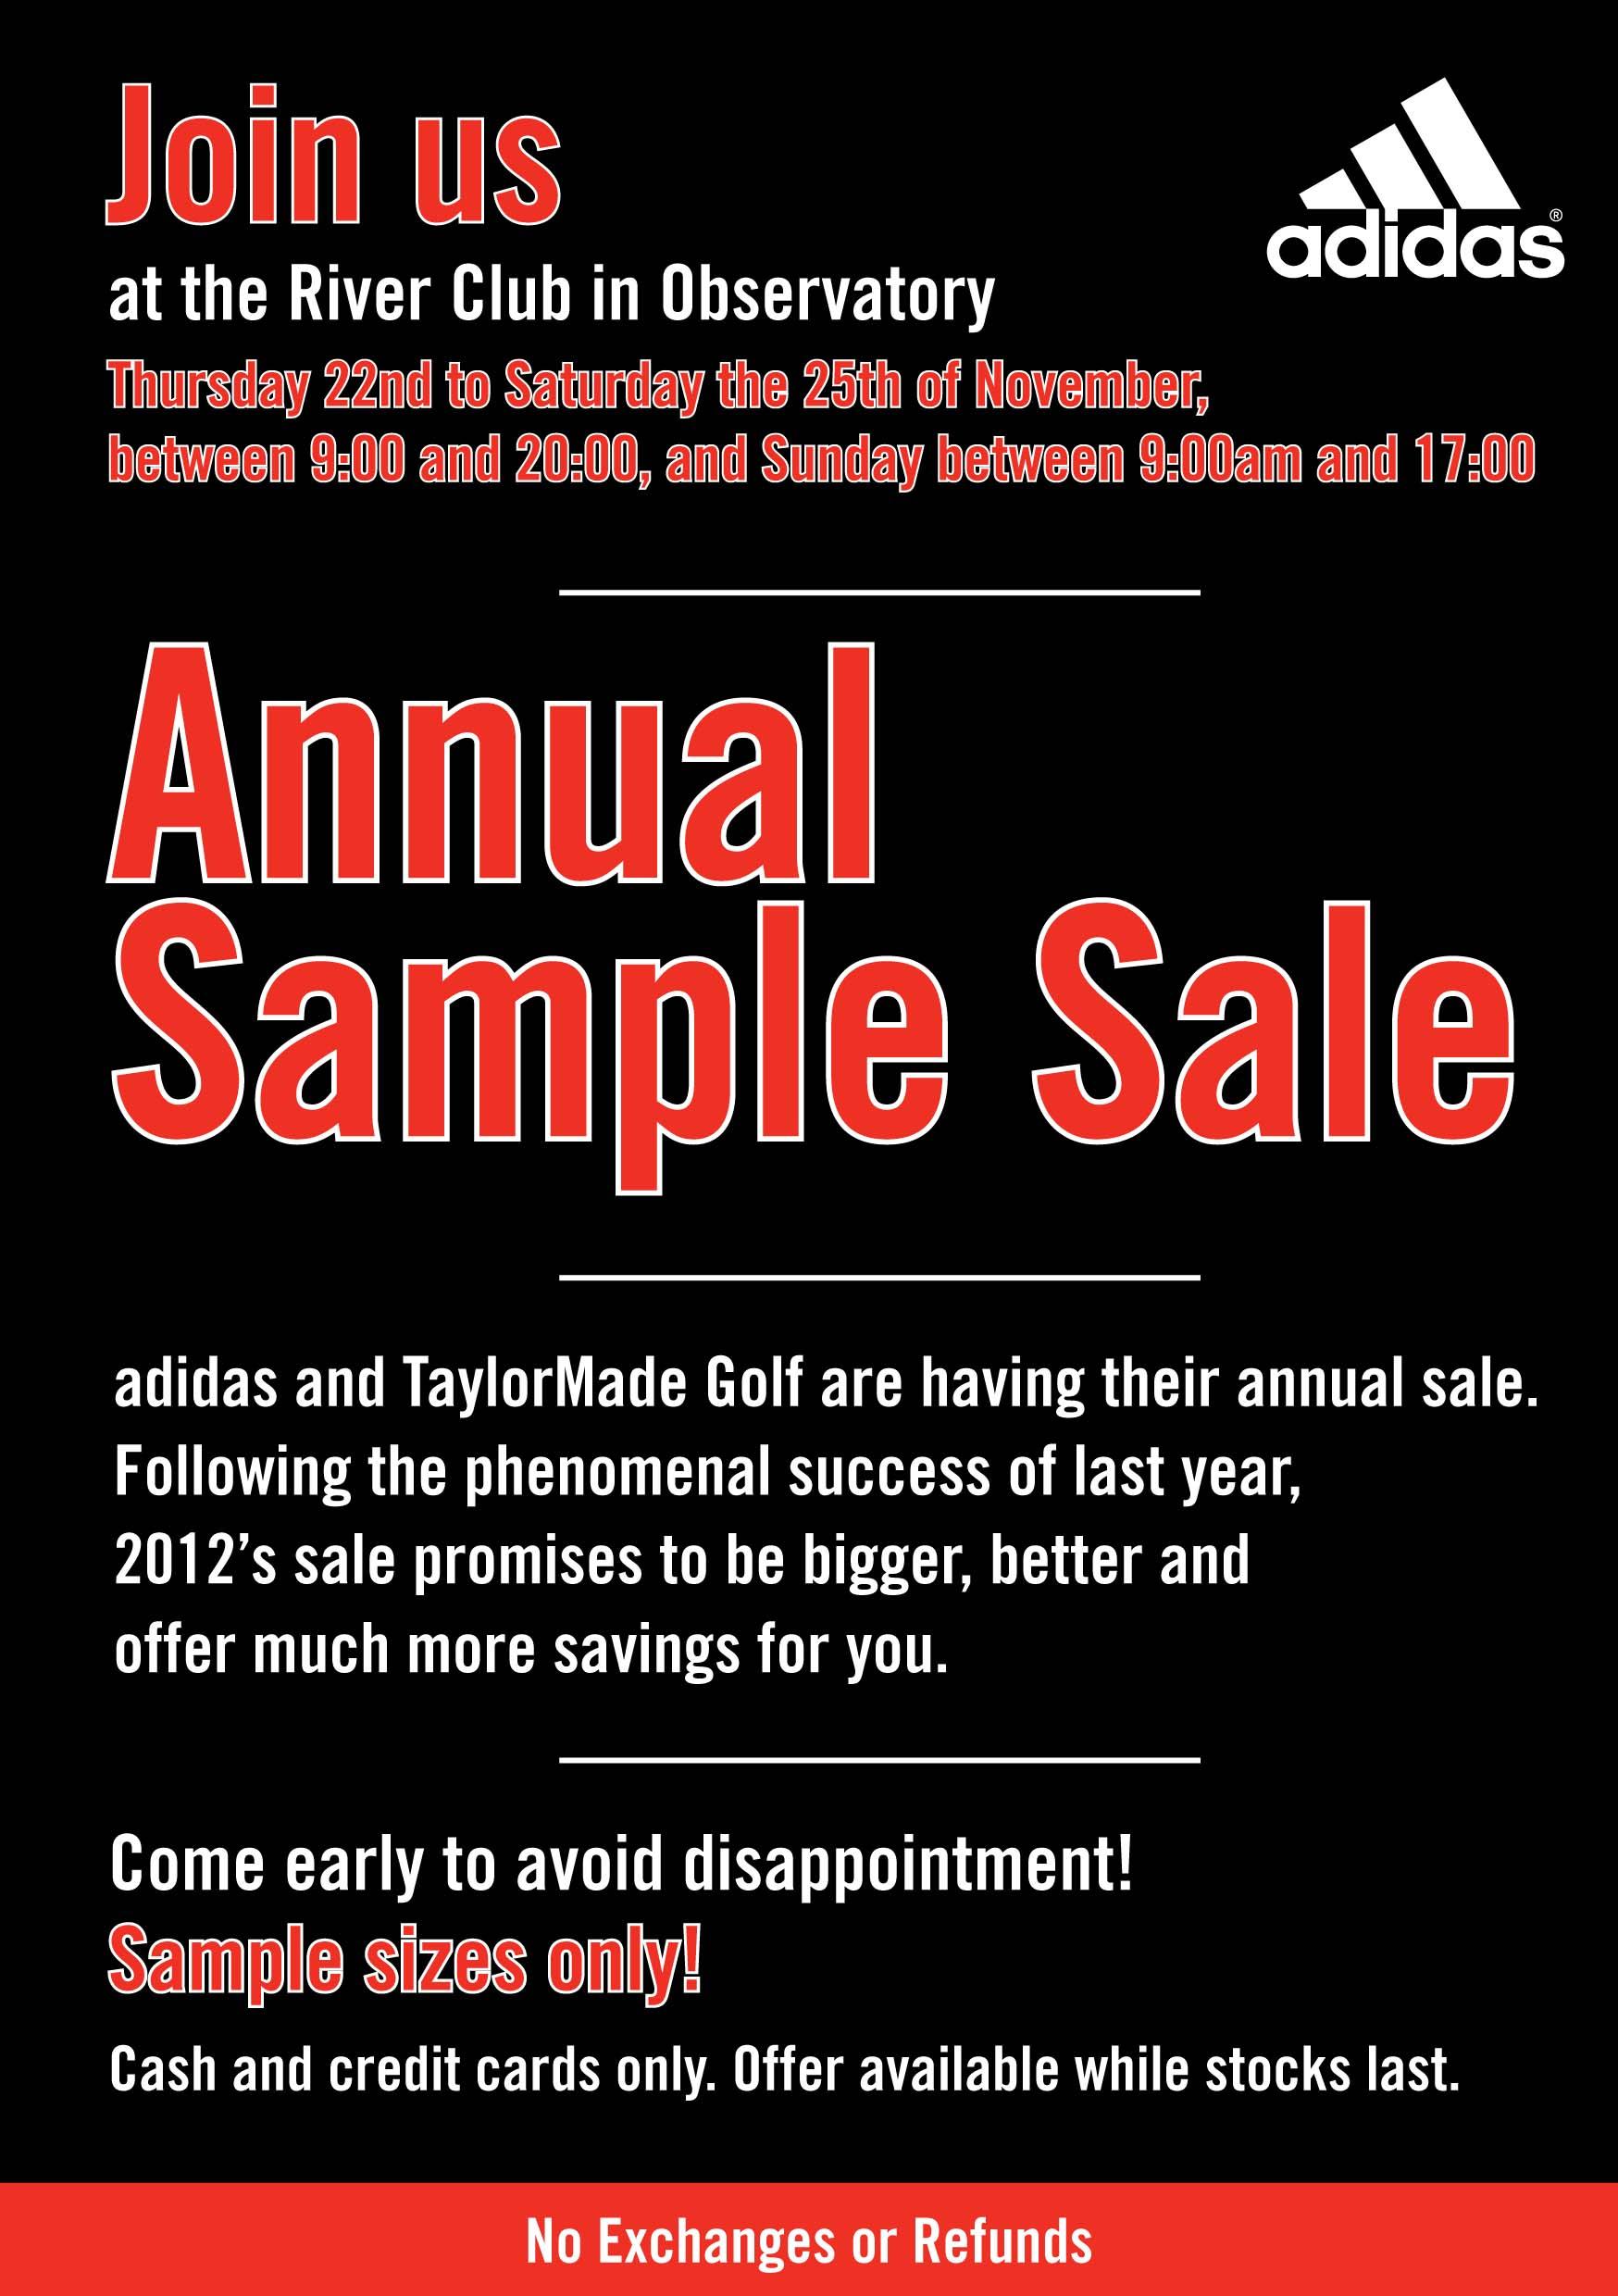 adidasZA on Twitter: "Join us annual sample sale, starting at 9am! http://t.co/C6Q1wceH" / Twitter